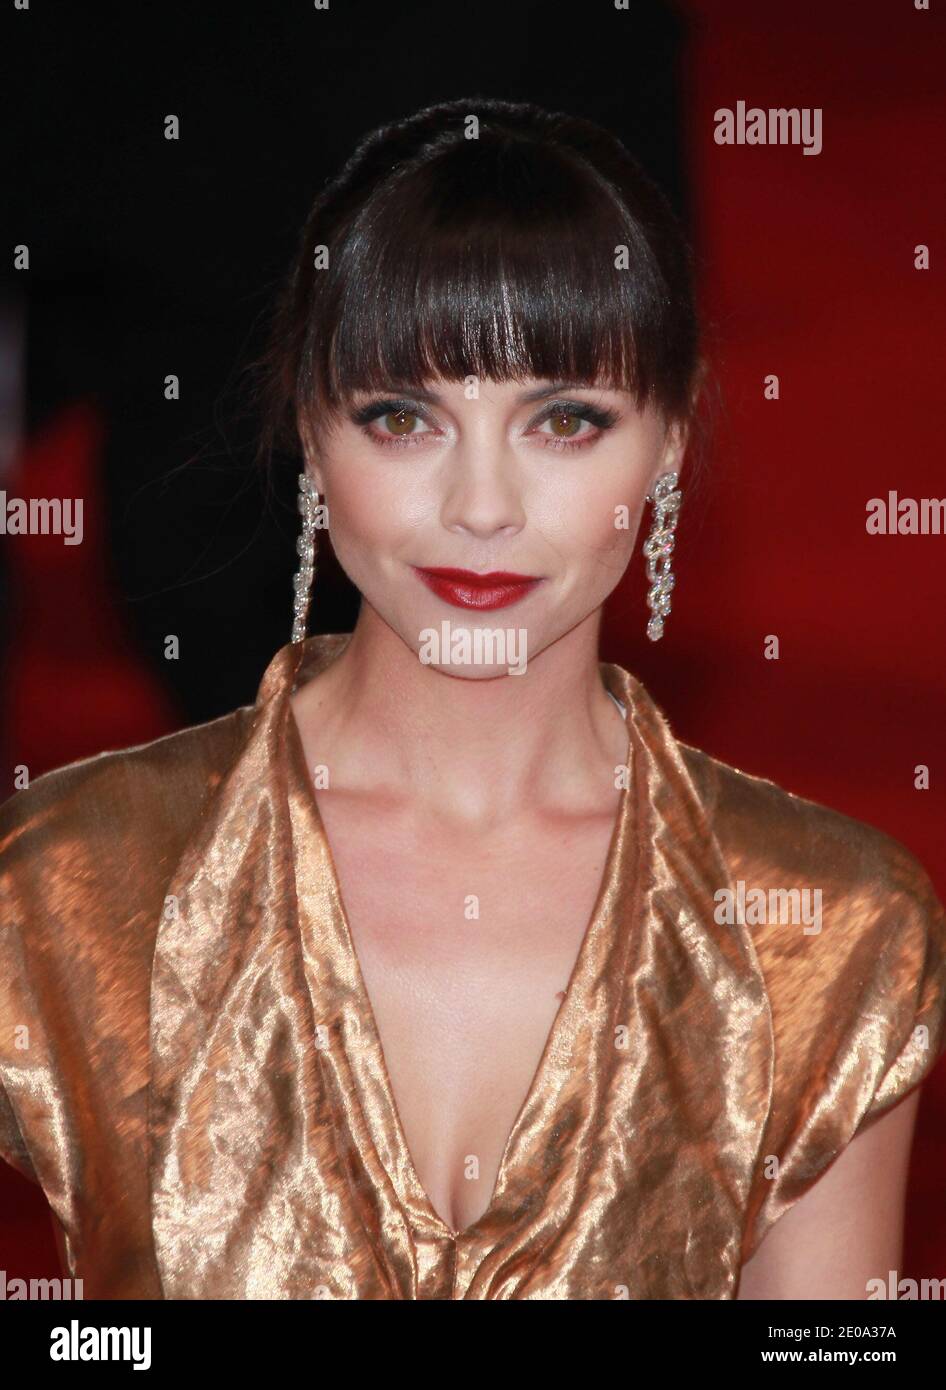 Christina Ricci arriving for the 2012 British Academy Film Awards (BAFTA) at the Royal Opera House in Covent Garden, central London, UK on February 12, 2012. Photo by Denis Guignebourg/ABACAPRESS.COM Stock Photo